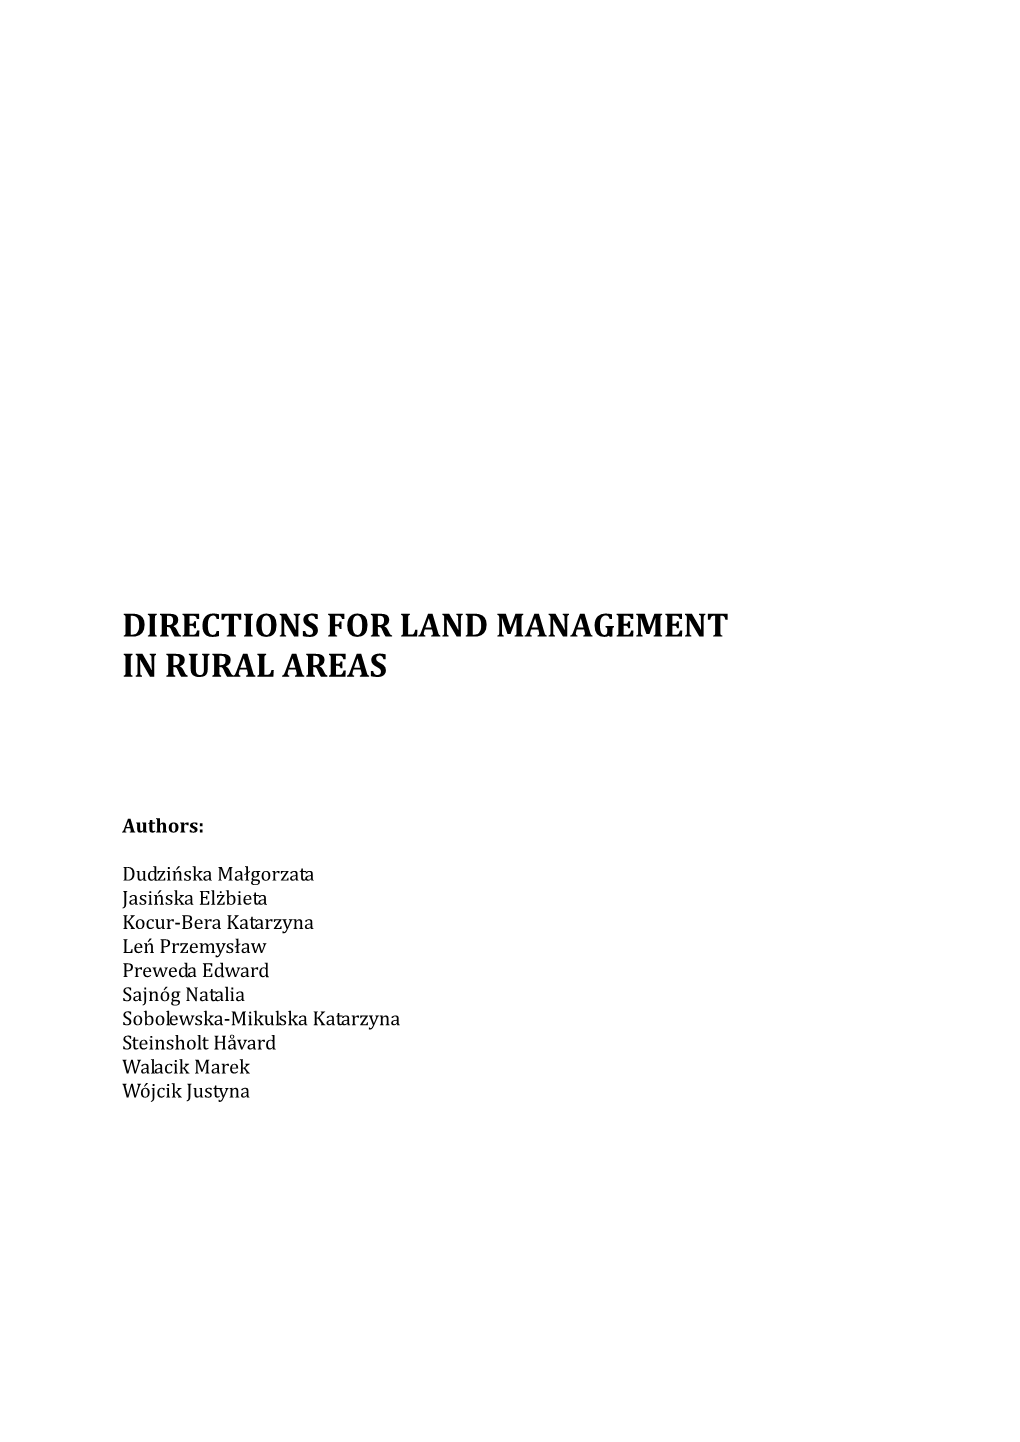 Directions for Land Management in Rural Areas